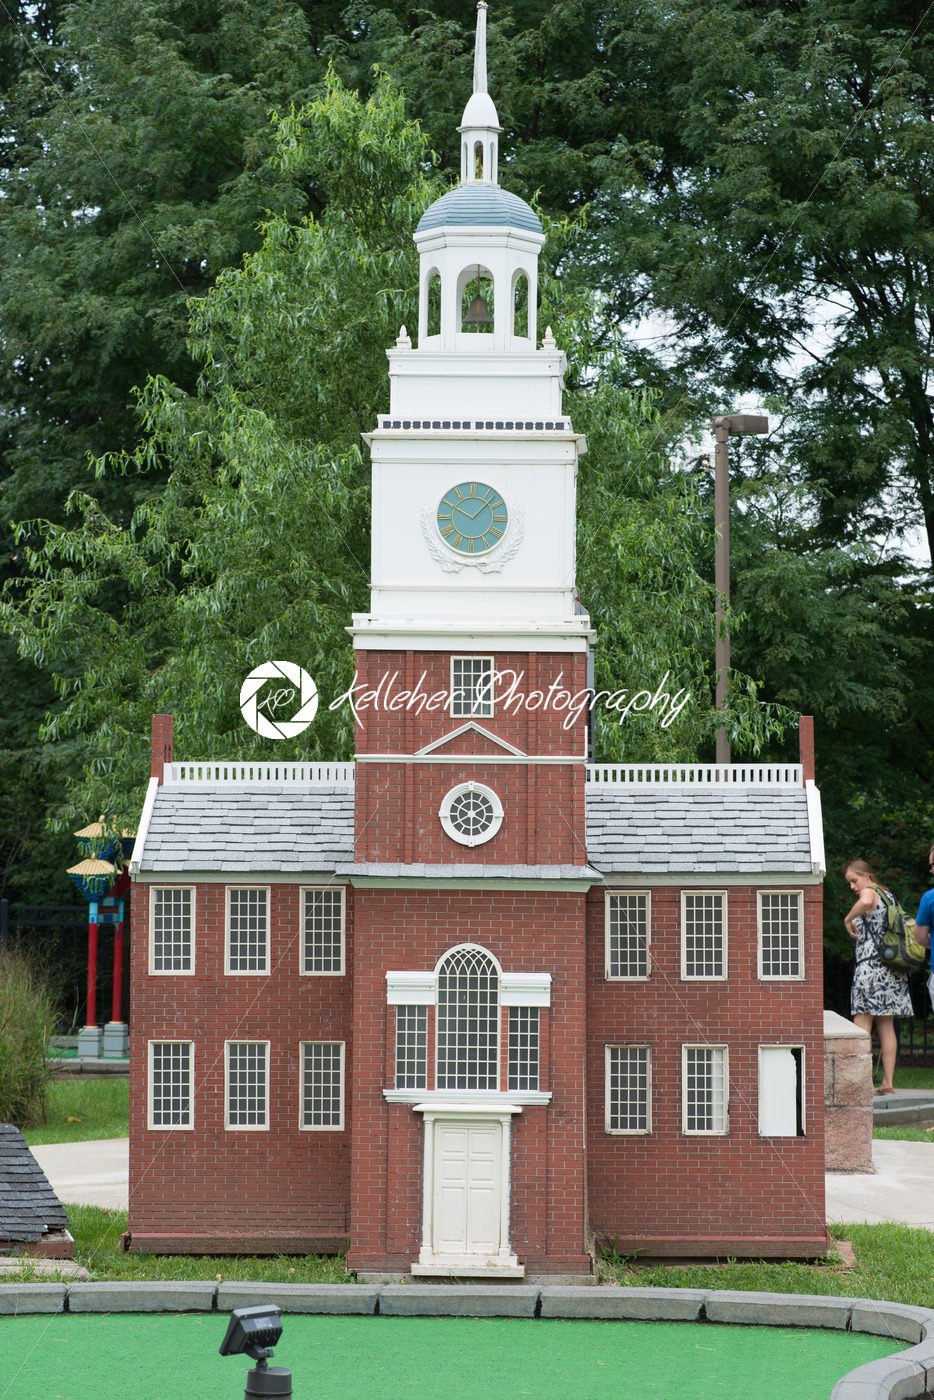 PHILADELPHIA, USA – AUGUST 12: Minature Golf course with Philadelphia themed structures in Franklin Square in Center City Philadelphia on August 12, 2017 - Kelleher Photography Store